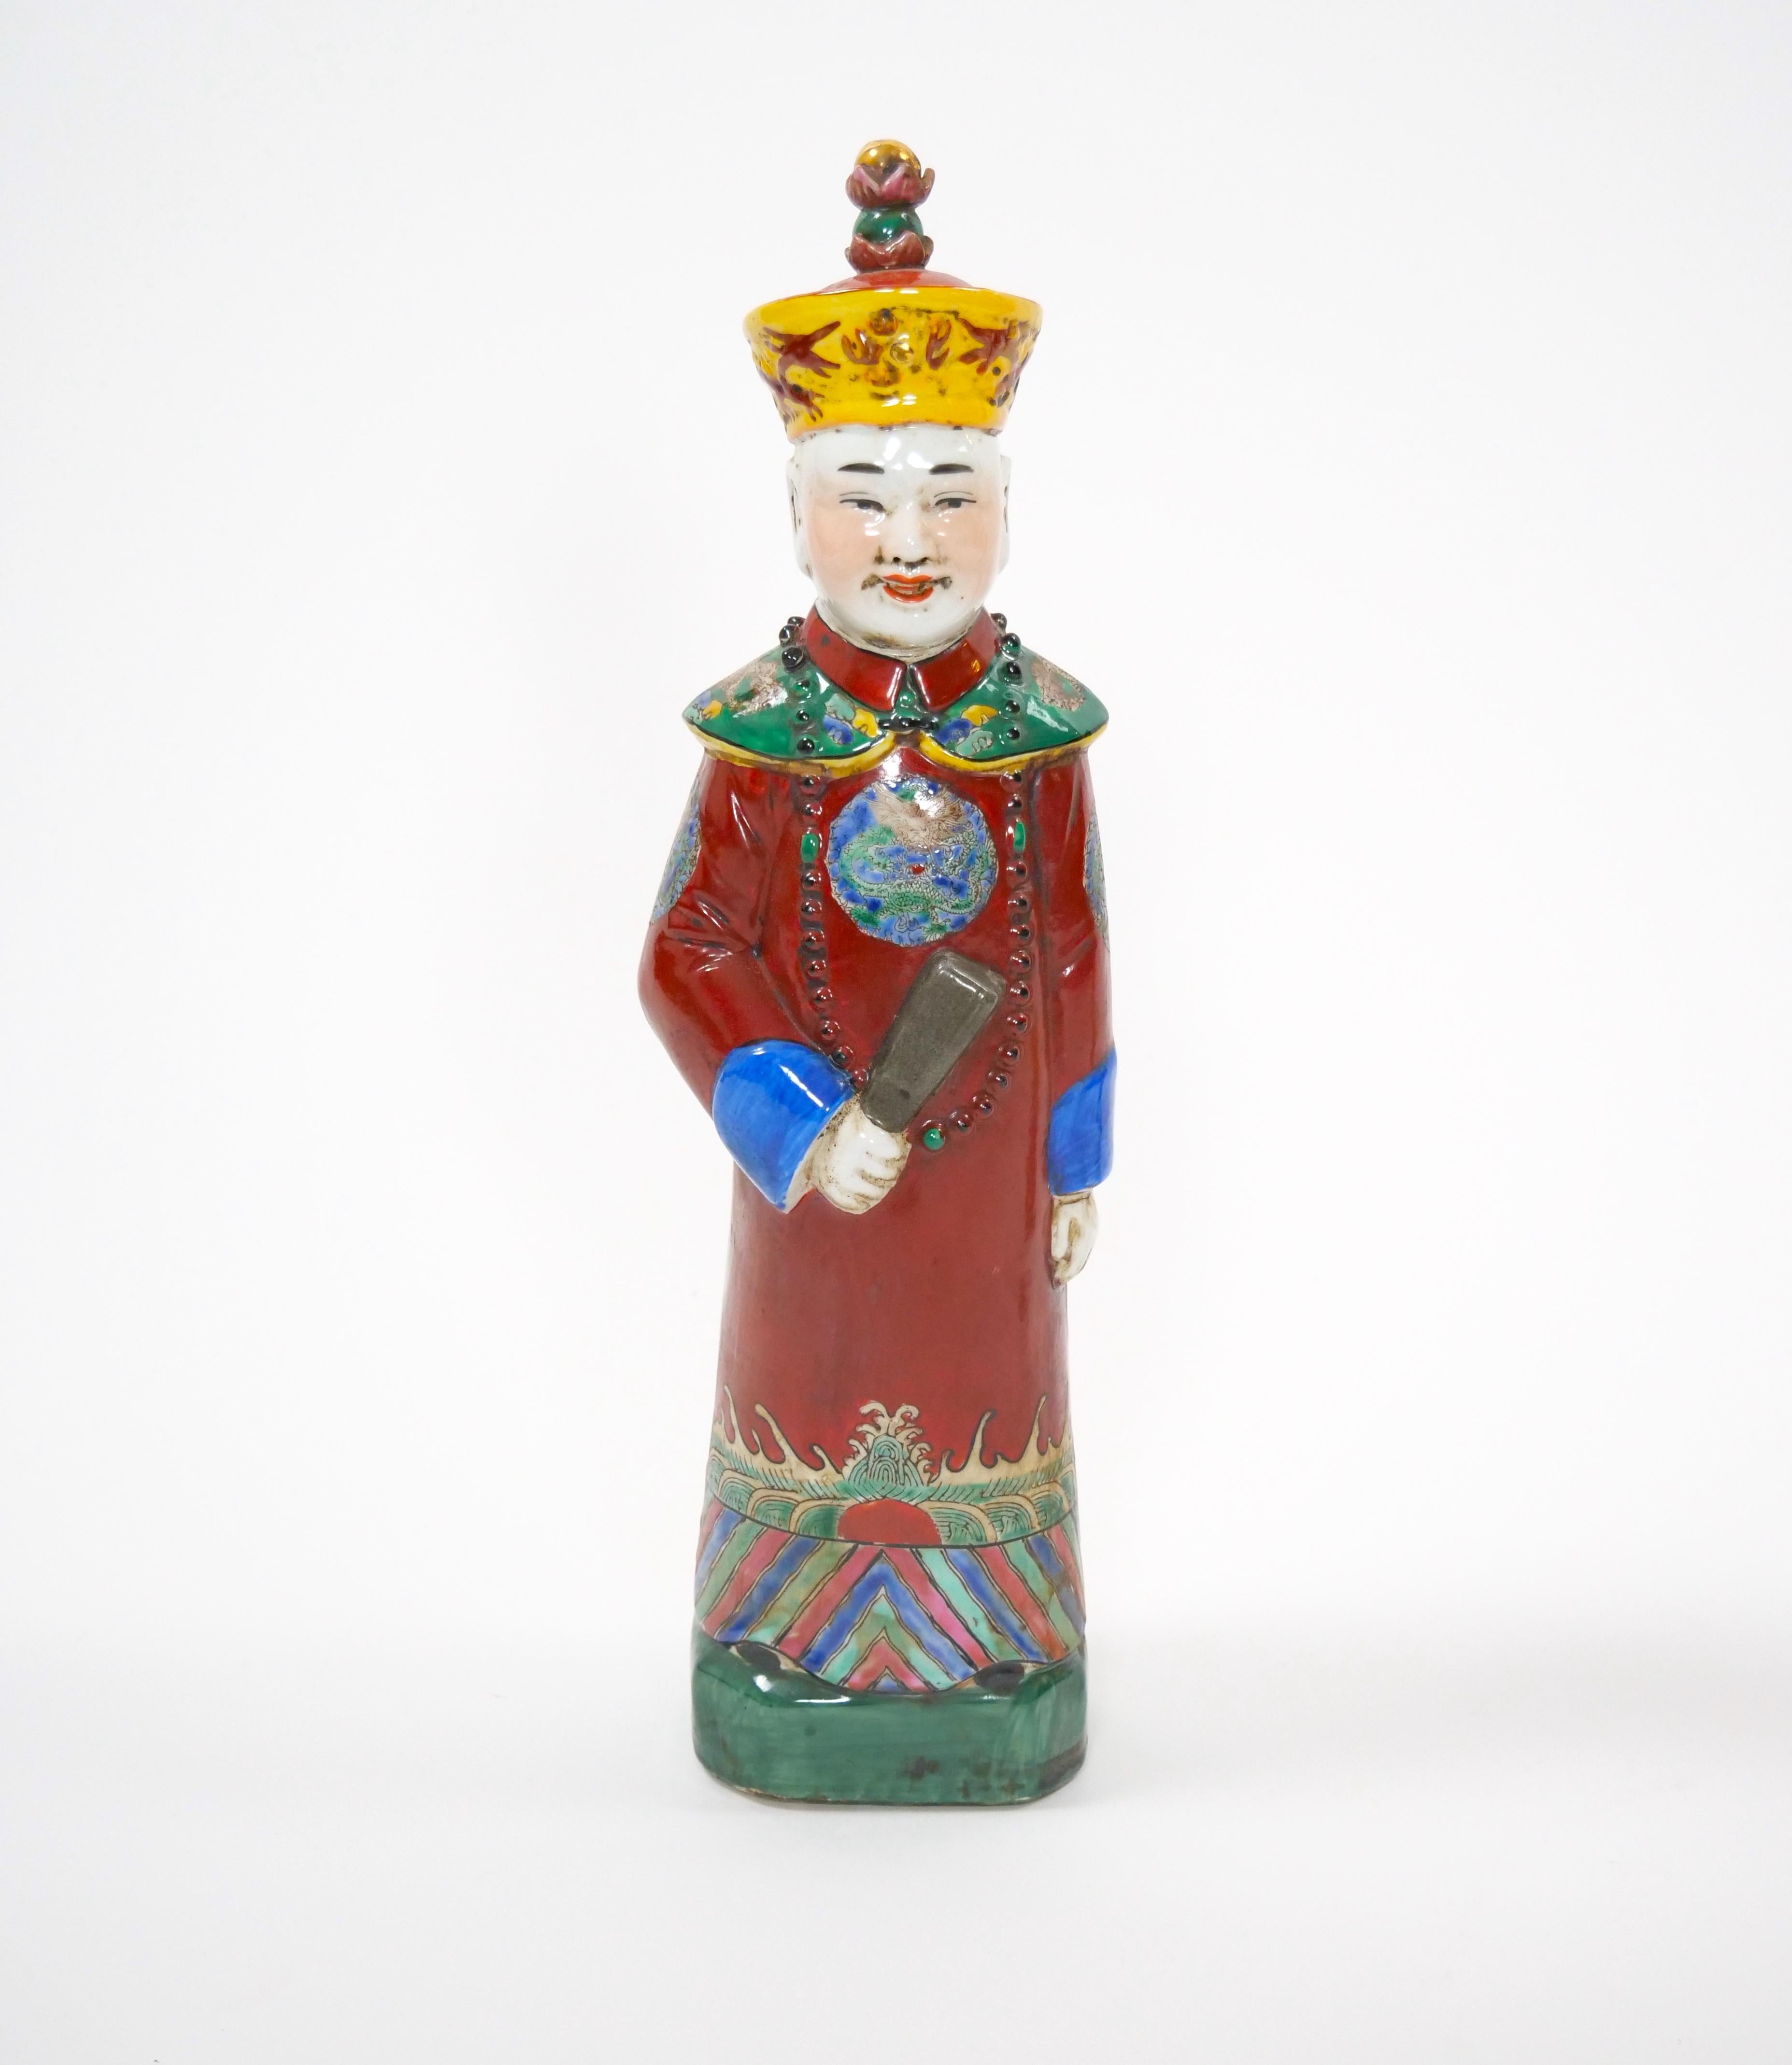 Elevate your collection with this exquisite Chinese porcelain figurine inspired by the illustrious Qing dynasty. Crafted in a stunning wucai style, the figurine depicts a distinguished emperor, regal royal, or a majestic monarch adorned in